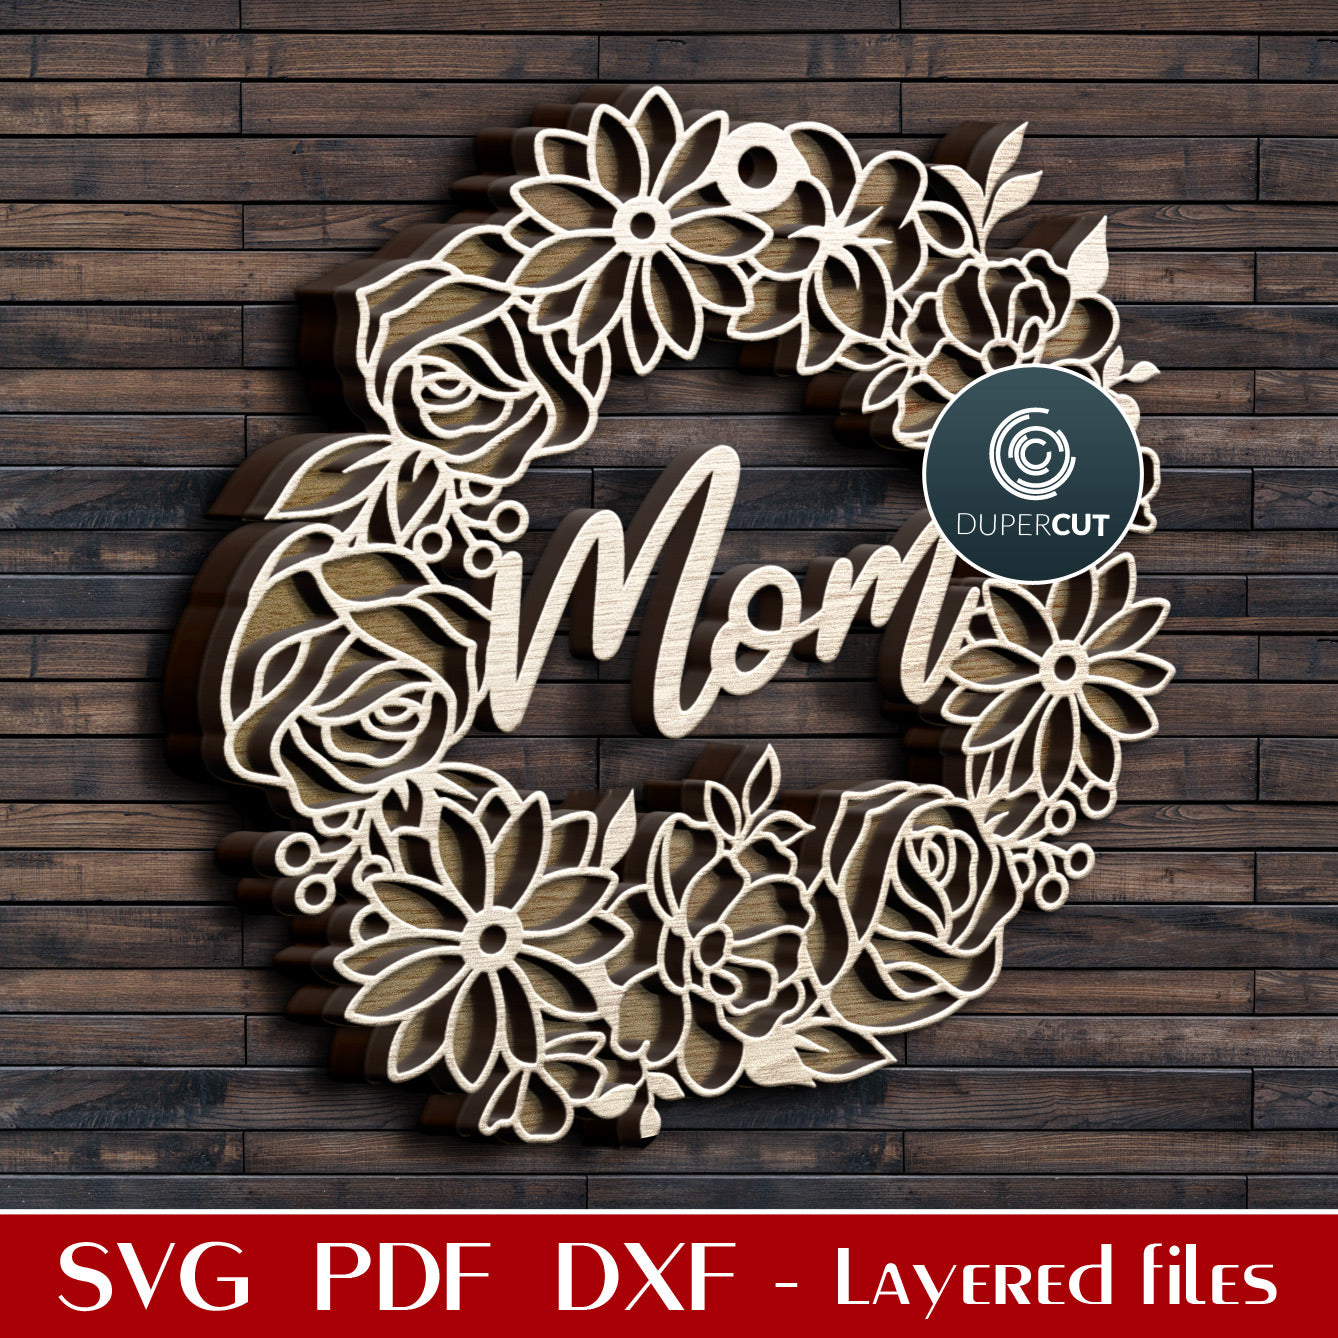 Mother's Day MOM flower wreath door hanger - SVG DXF layered laser cutting files for Glowforge, Cricut, Silhouette, CNC plasma machines, scroll saw pattern by www.DuperCut.com 